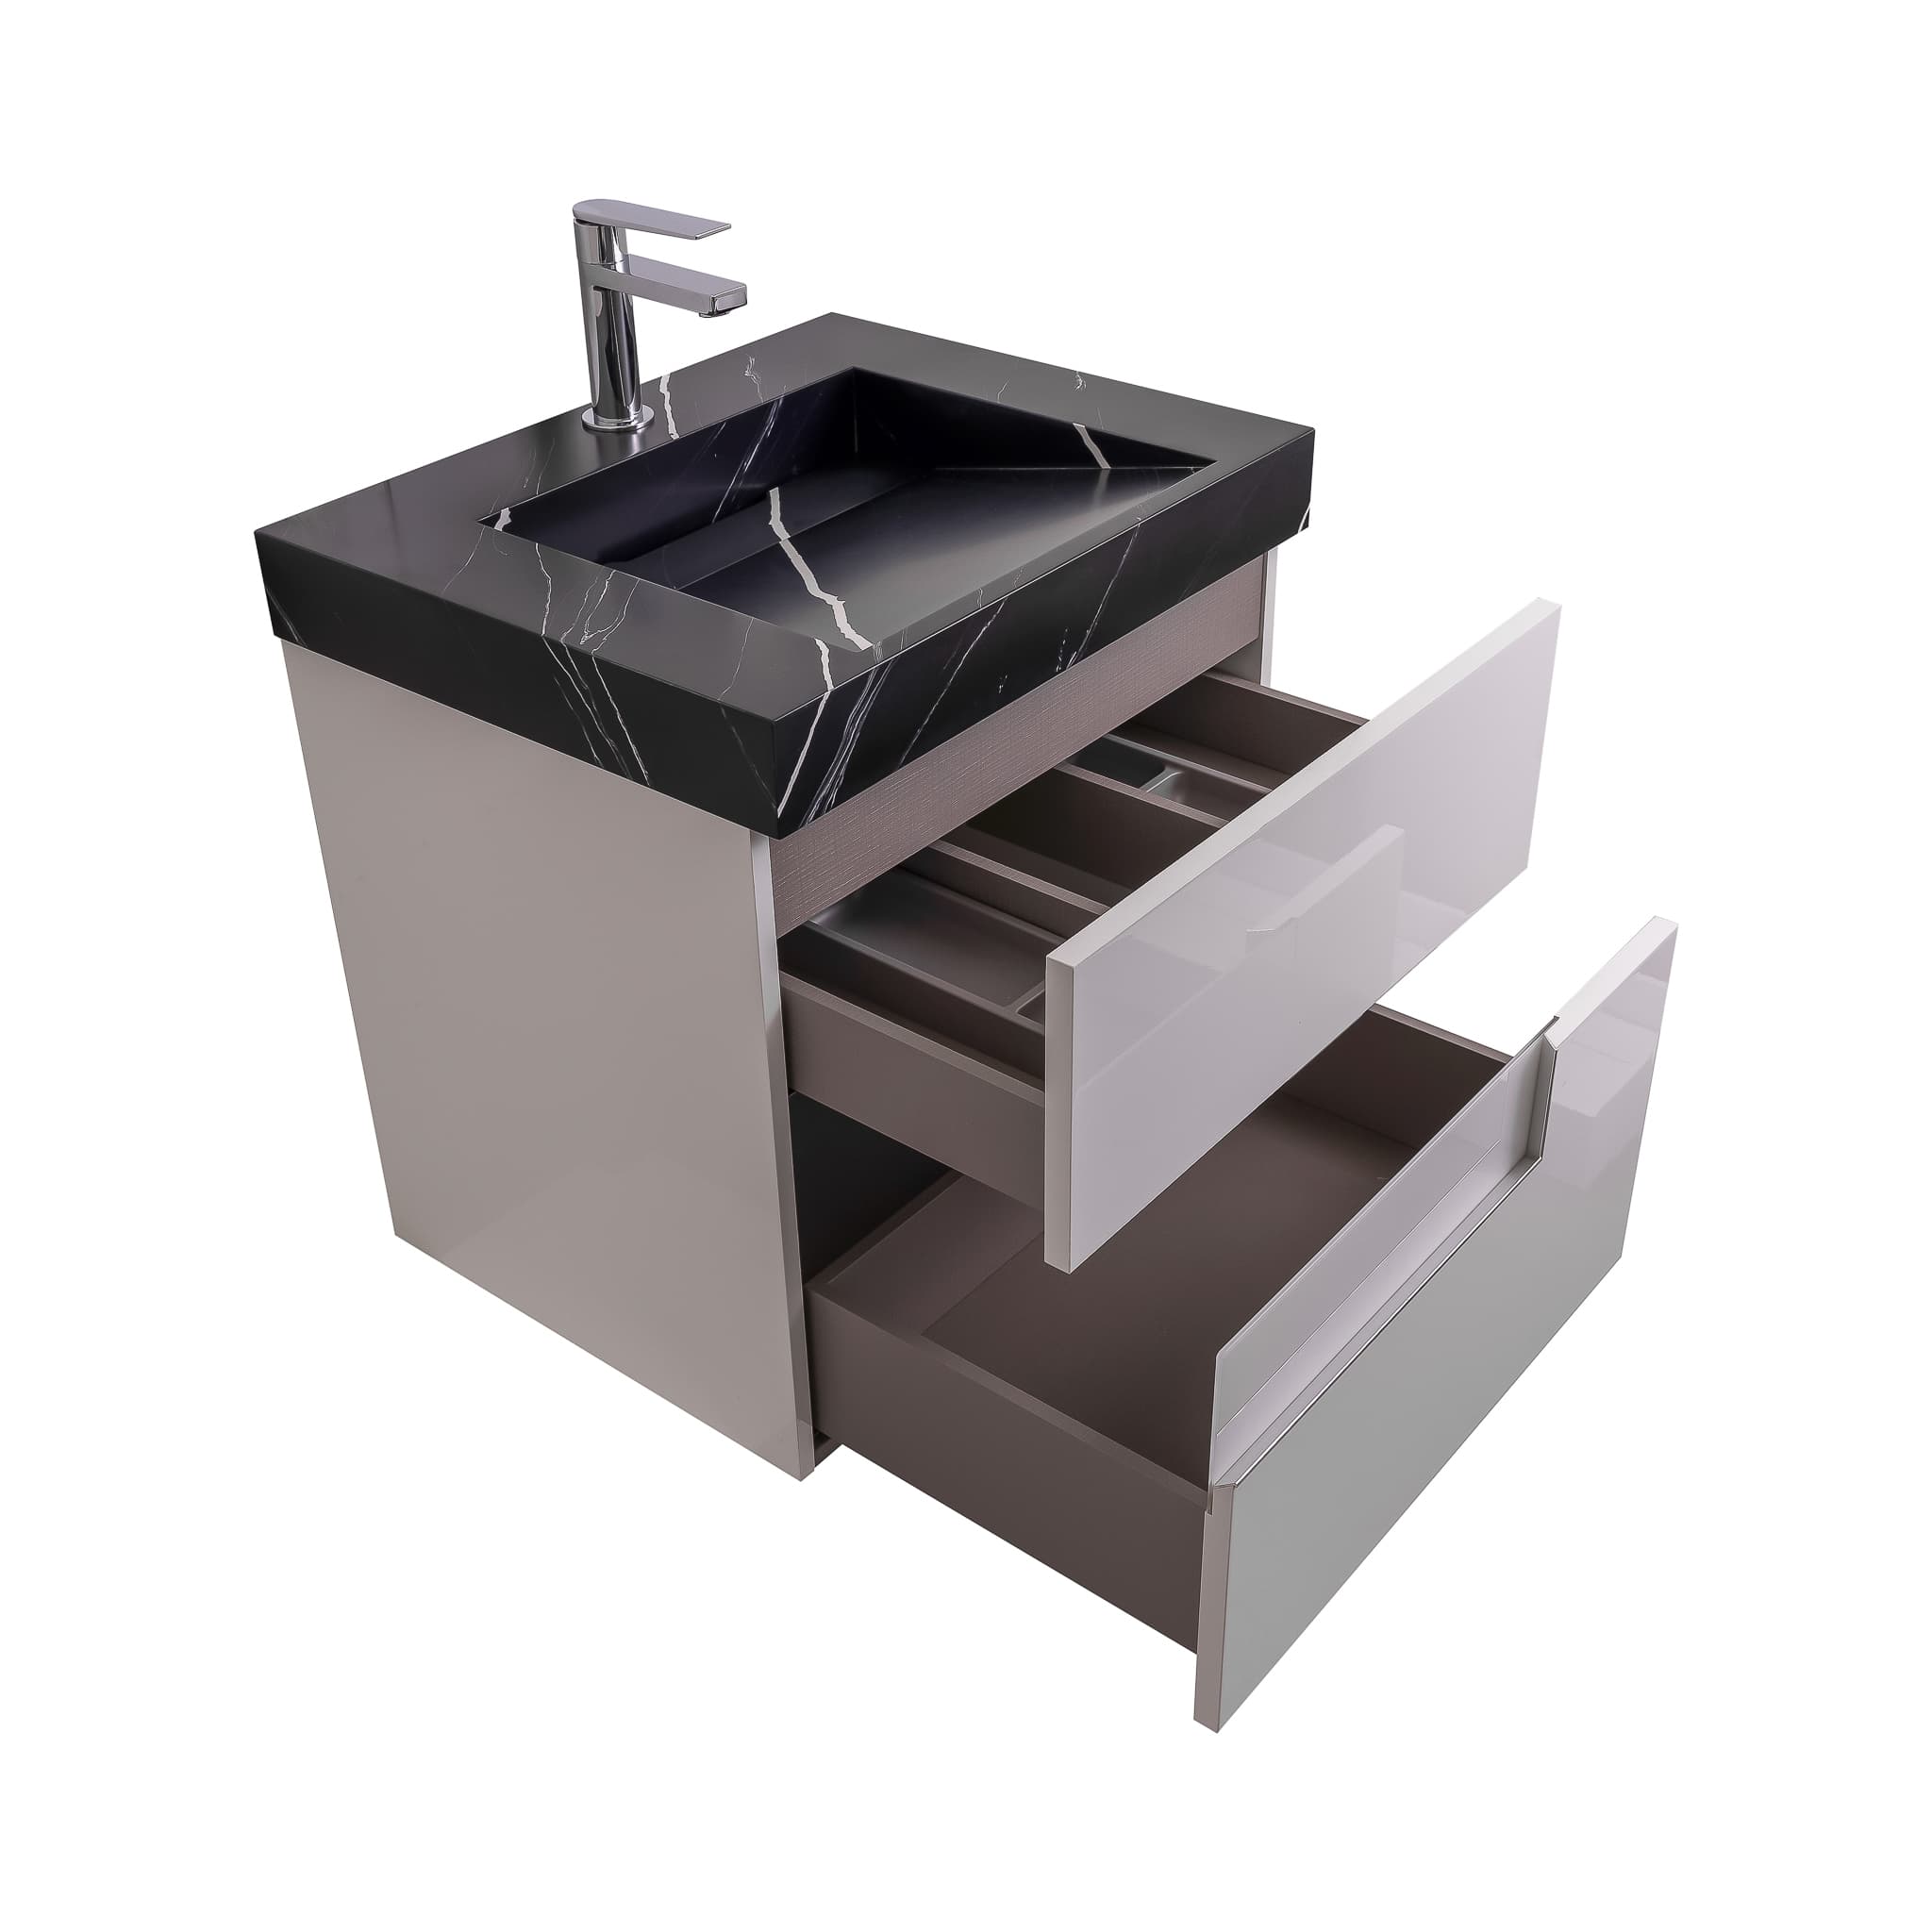 Vision 23.5 White High Gloss Cabinet, Solid Surface Matte Black Carrara Infinity Sink, Wall Mounted Modern Vanity Set